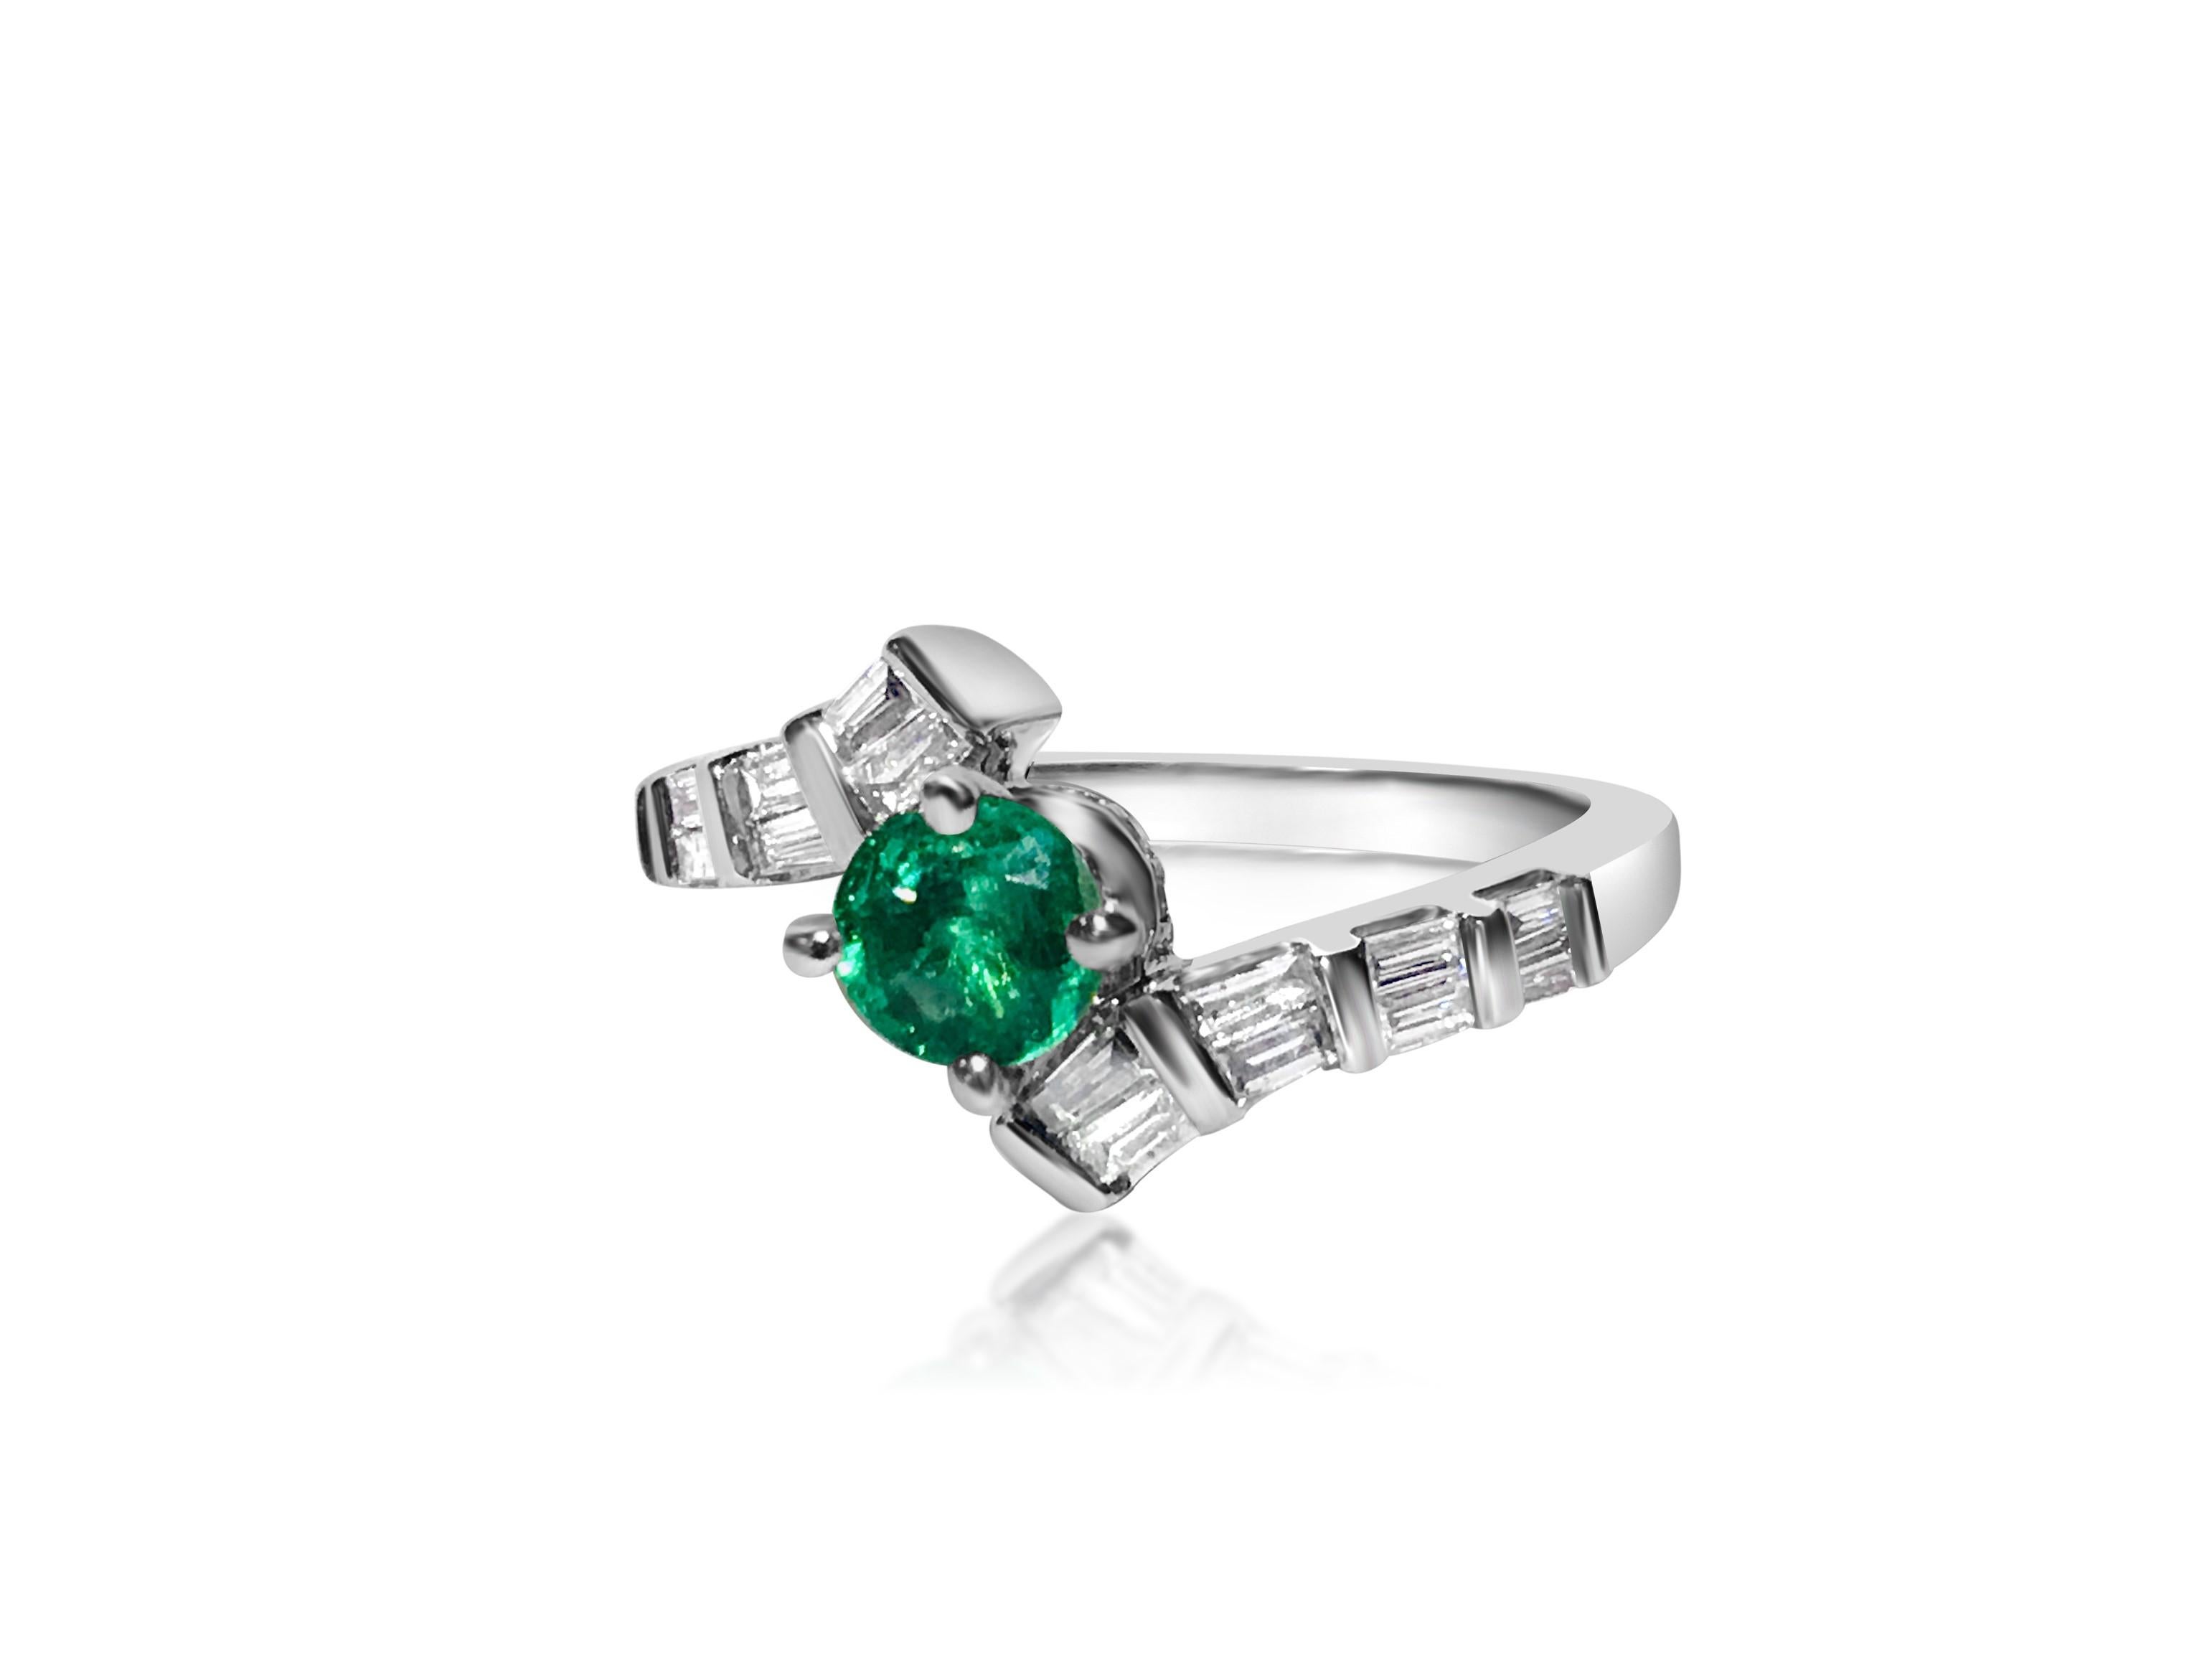 Metal: 14K white gold.
1.00 carat diamonds total. VS clarity and G color. Baguette cut diamonds. 
0.70 carat Colombian Emerald, round cut. All stones are 100% natural earth mined. 
TCW of all stones: 1.70 carat. 
Art Deco style emerald diamond